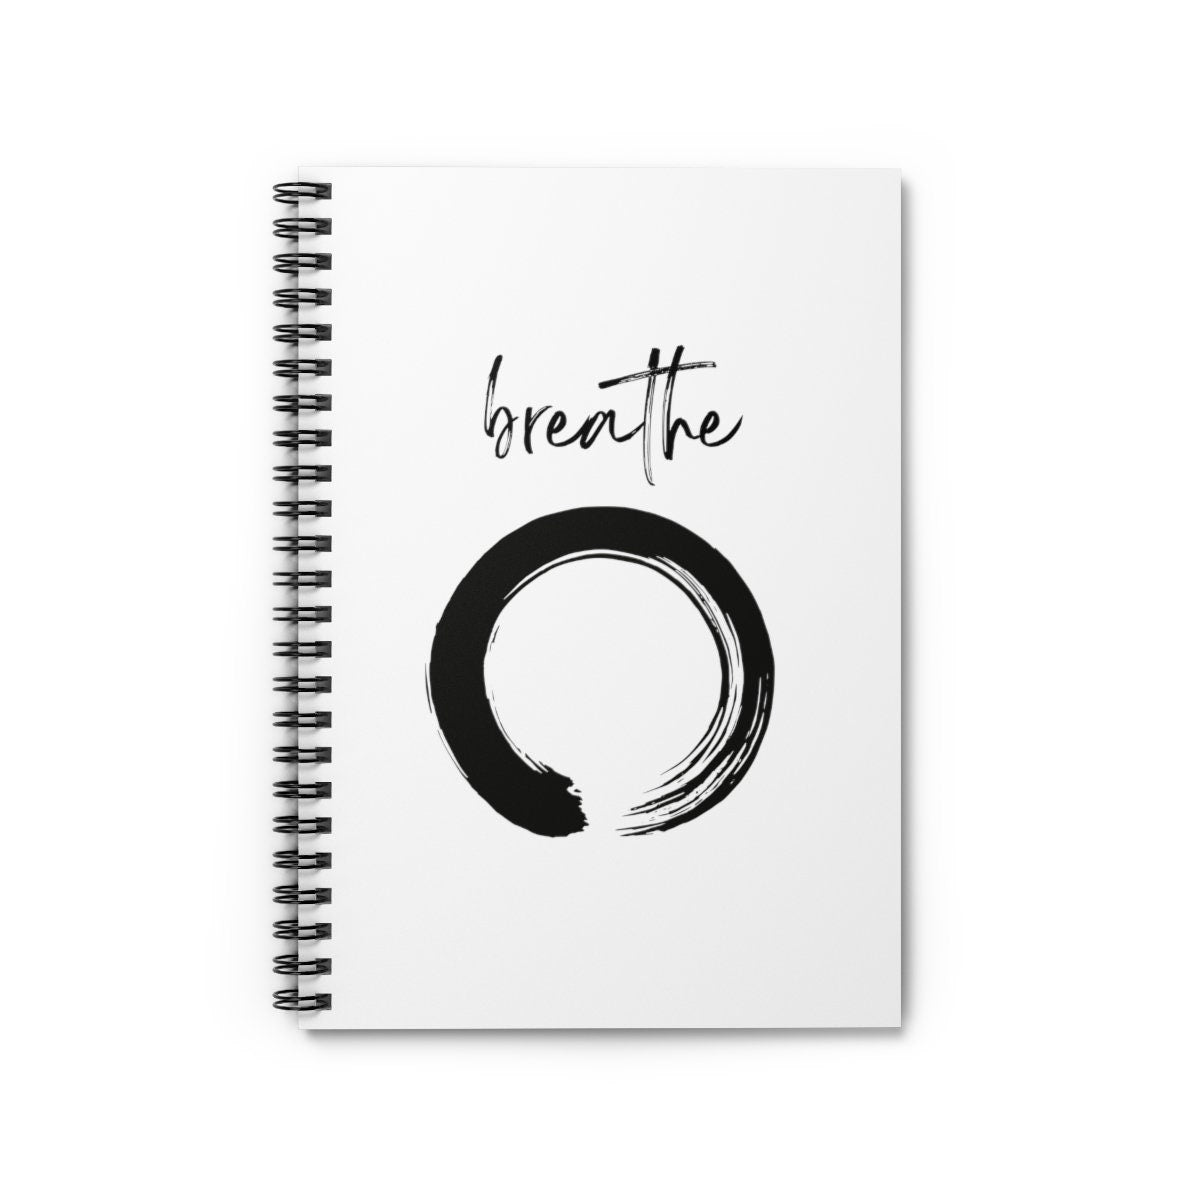 Breathe Spiral Notebook - Ruled Line with enso circle zen calligraphy style, mindfulness and meditation gift